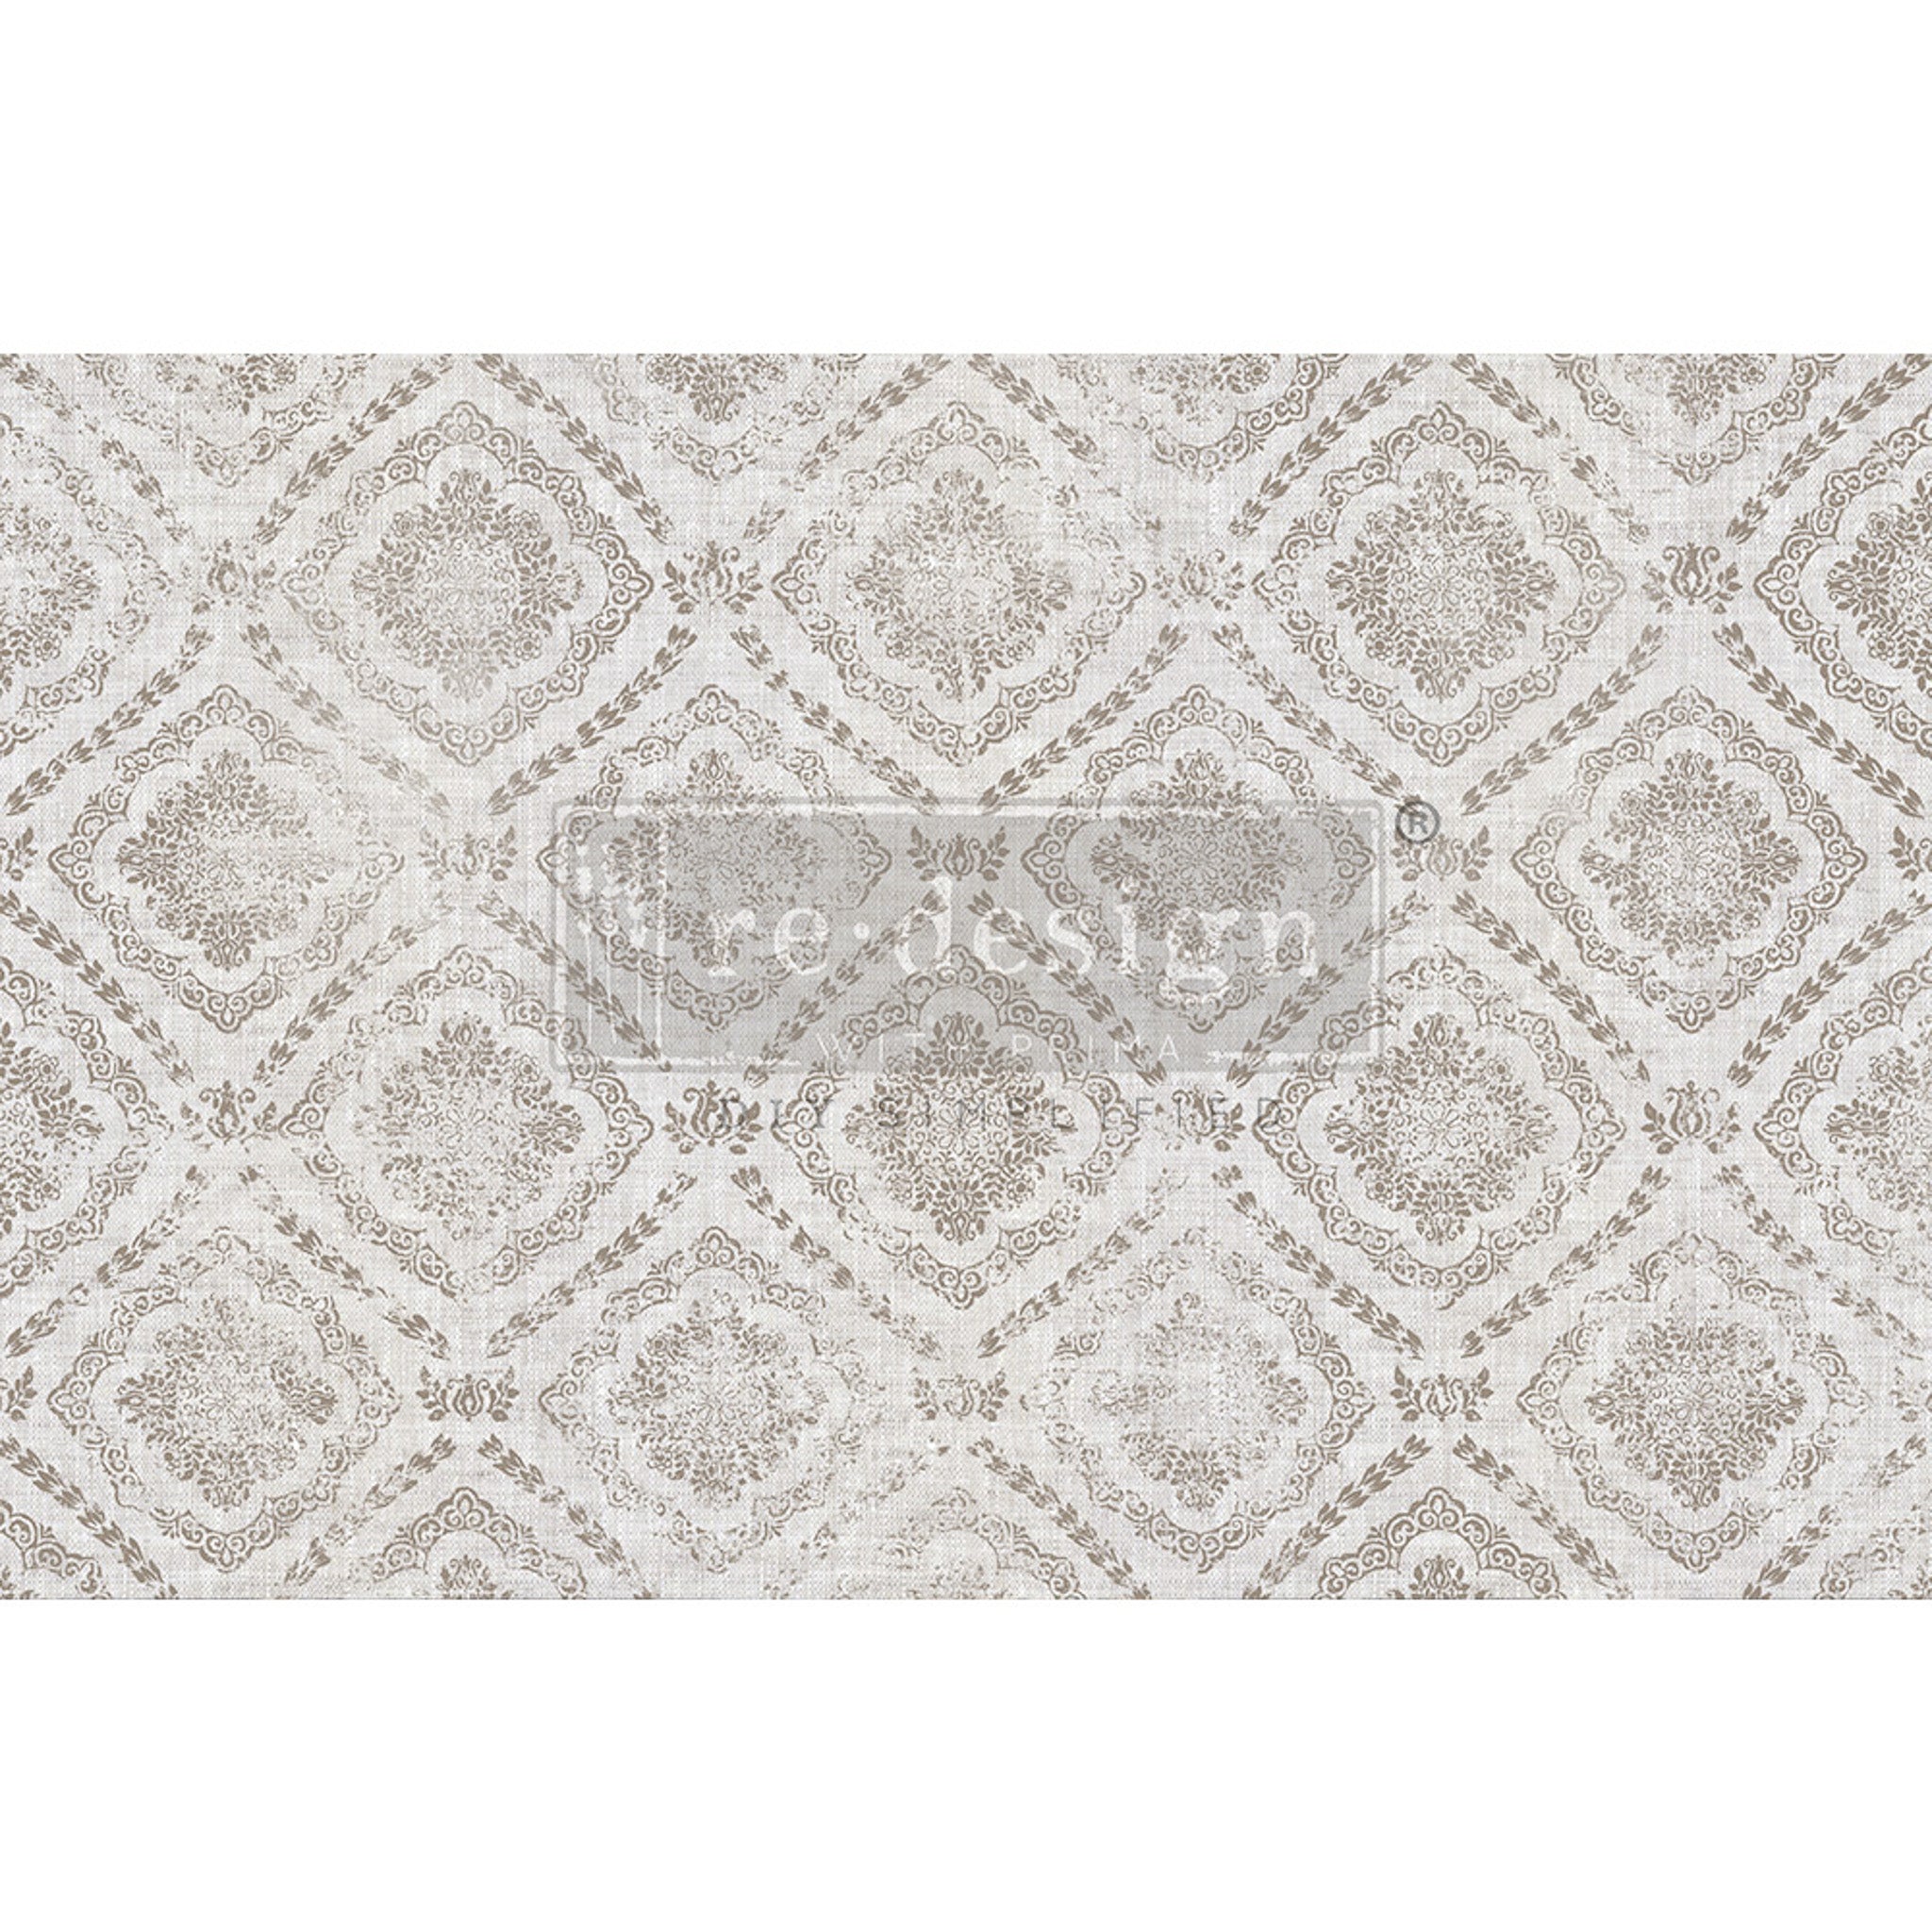 Tissue paper design that features a repeating floral diamond pattern against a soft grey background.